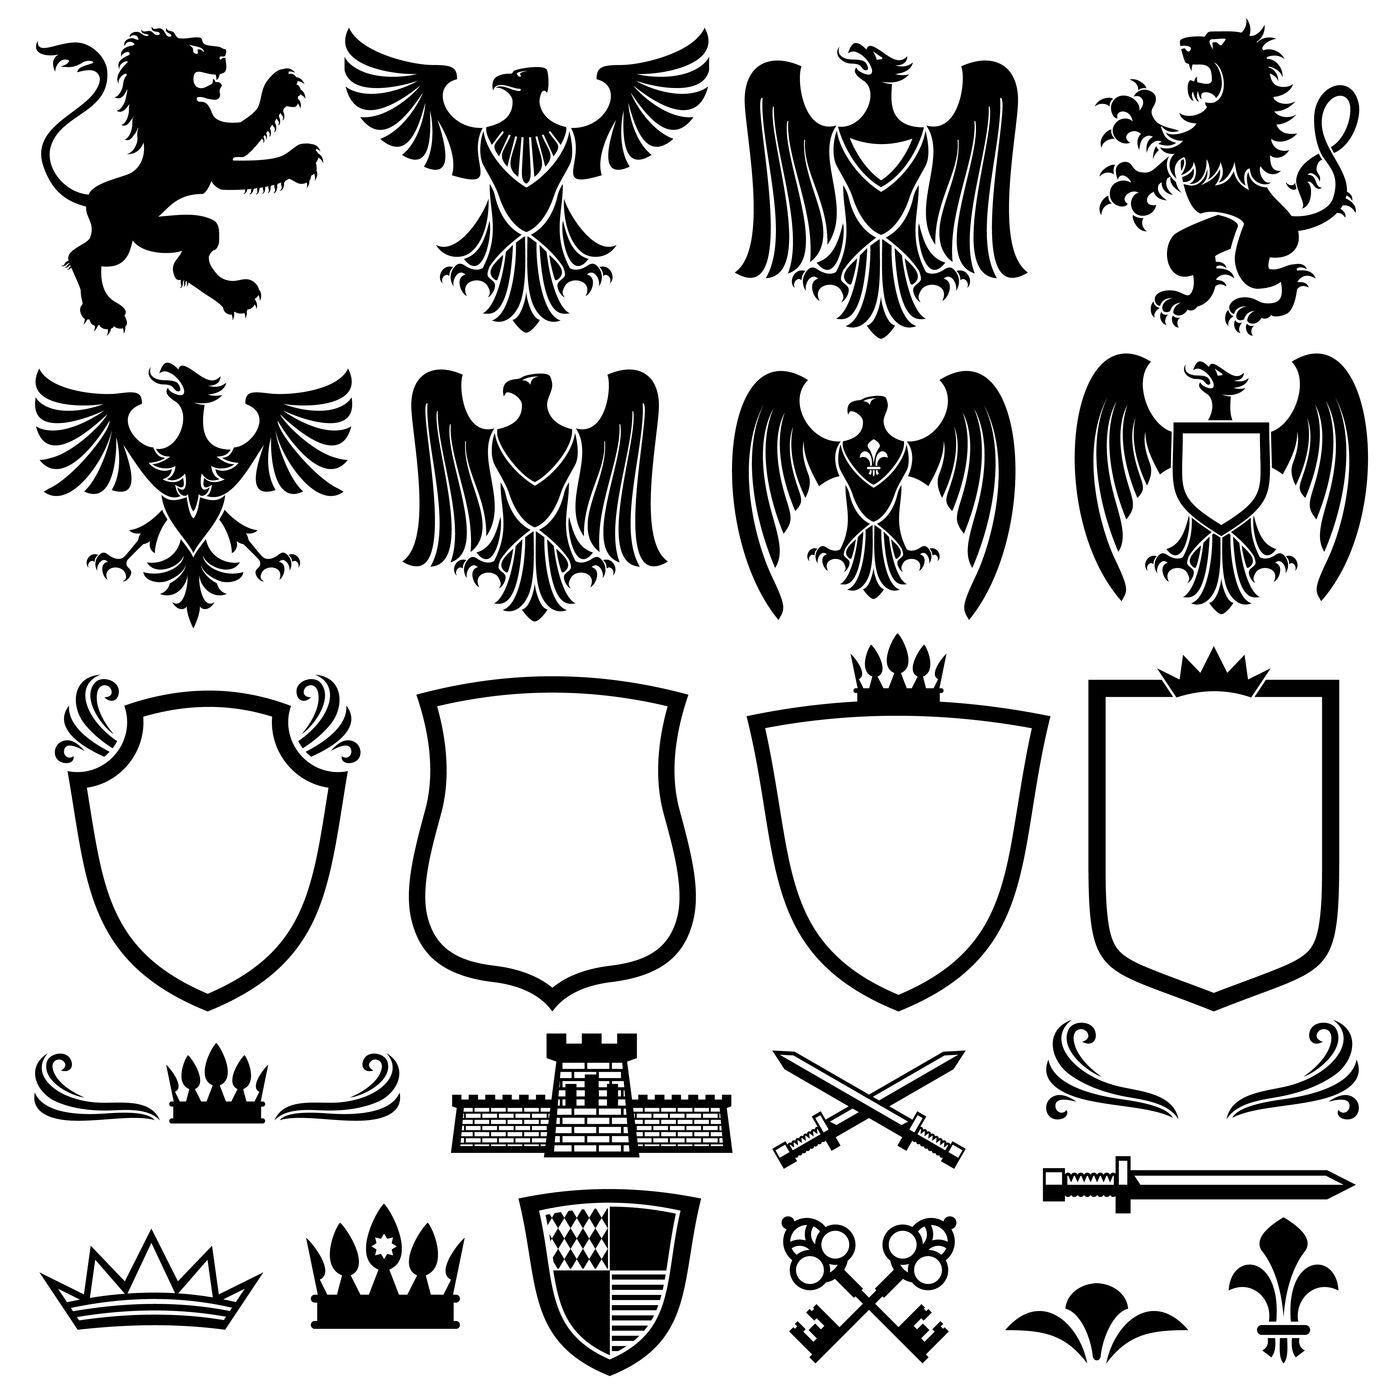 family-coat-of-arms-vector-elements-for-heraldic-royal-emblems-by-microvector-thehungryjpeg